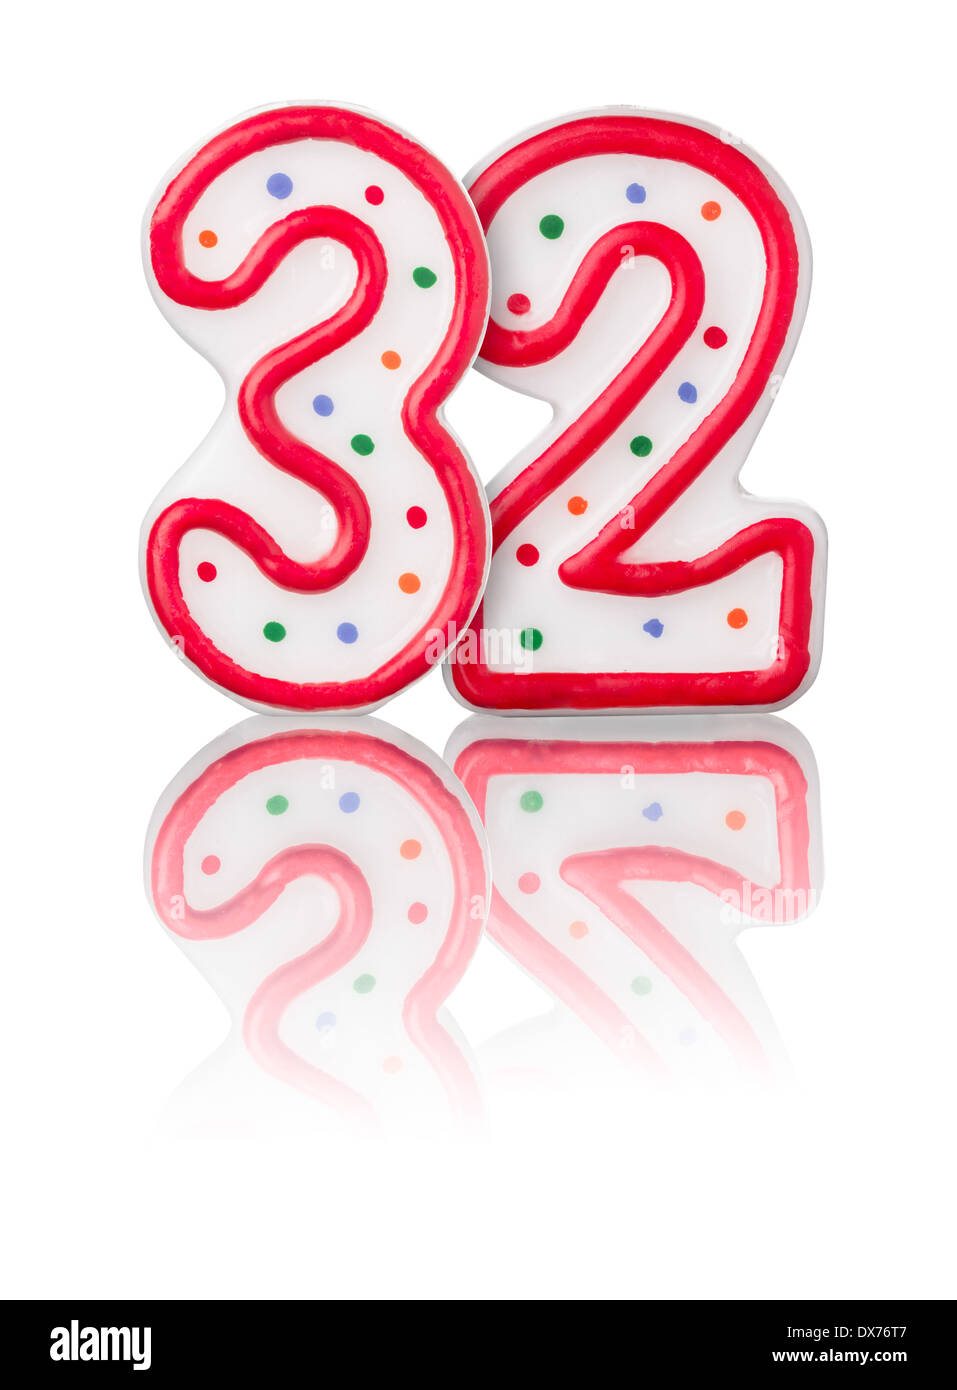 Red number 32 with reflection on a white background Stock Photo